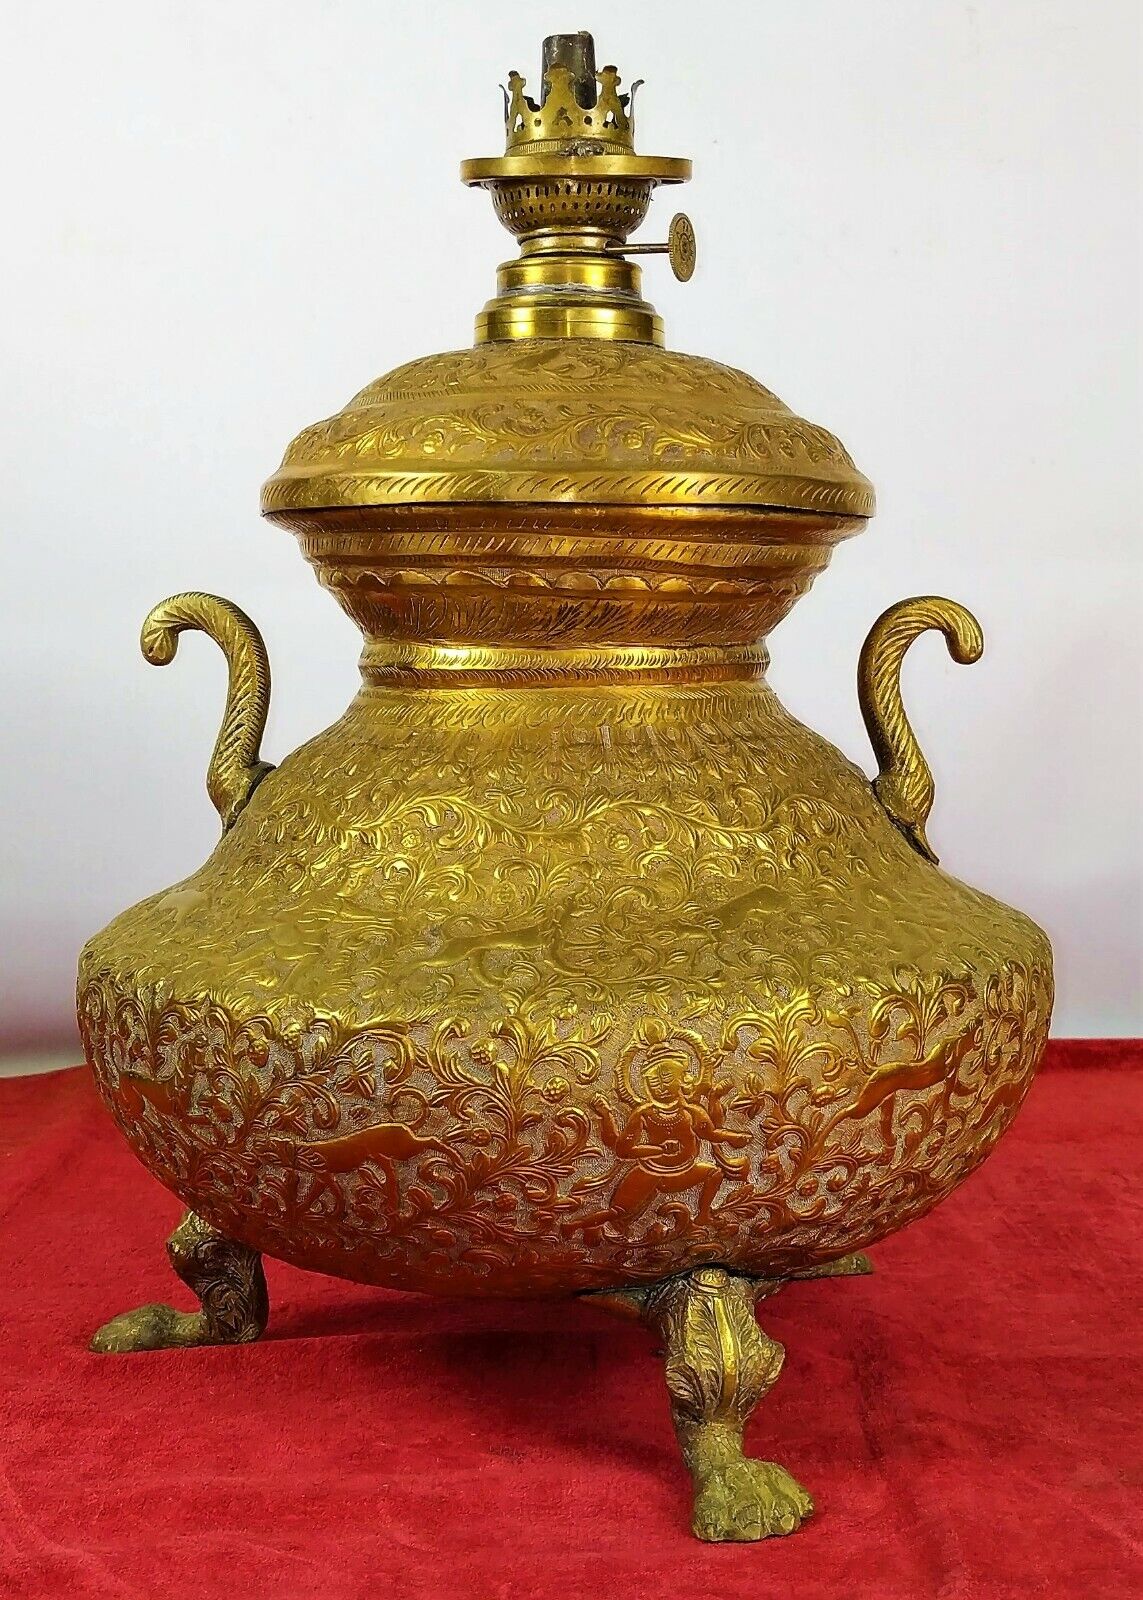 LARGE MUGHAL STYLE JAR, TRANSFORMED INTO QUINQUÉ. CHISELED BRONZE. INDIA. XIX-XX